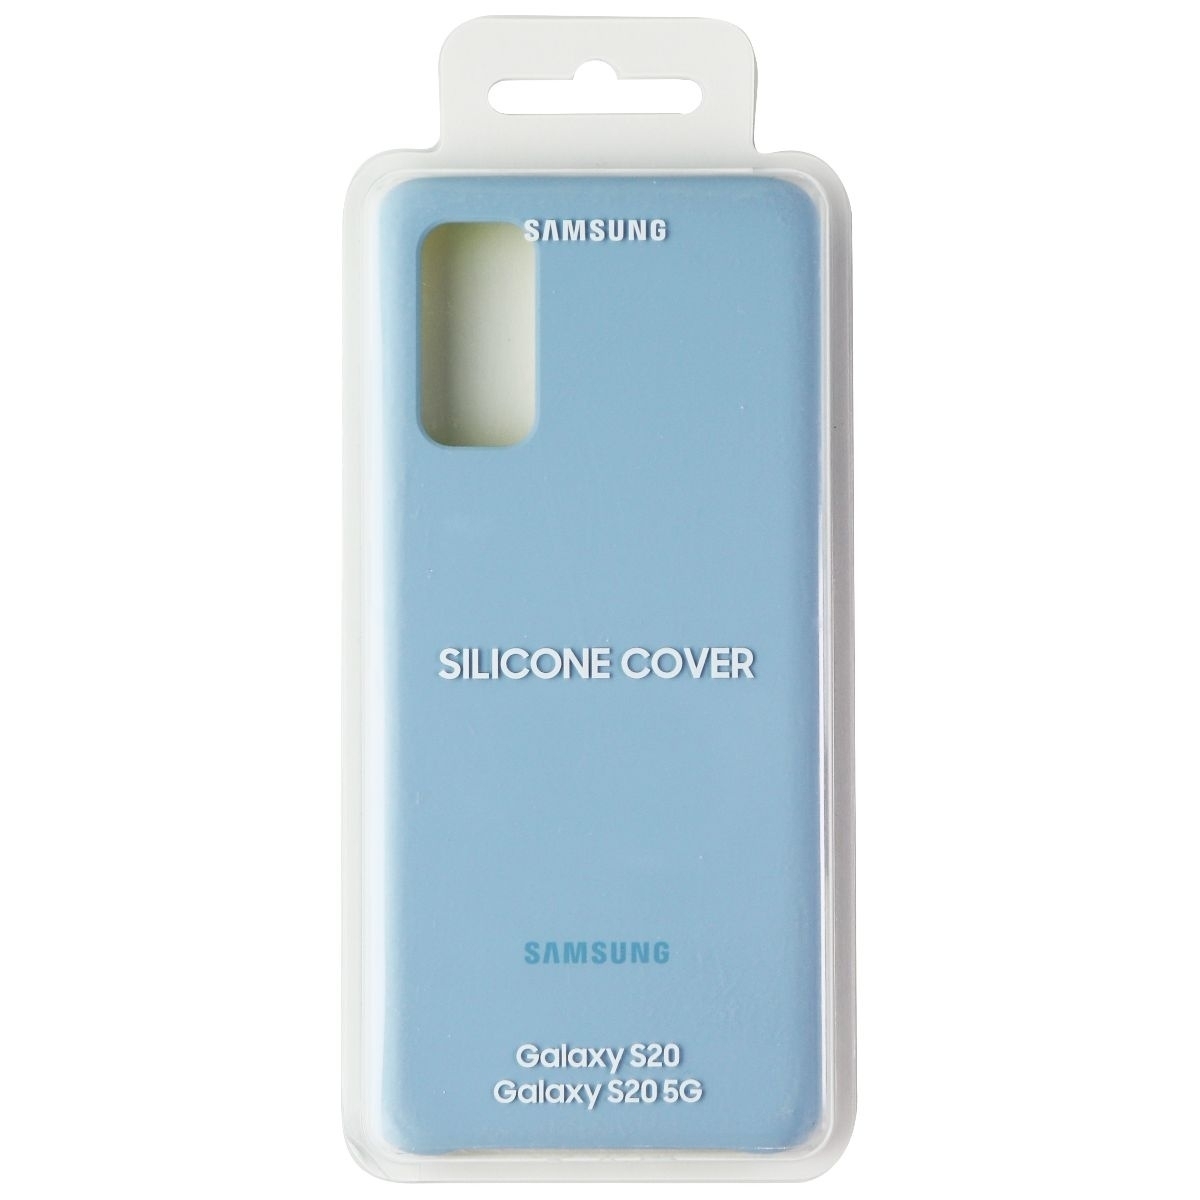 Samsung Silicone Cover Series Case For Samsung Galaxy S20/S20 5G - Blue Coral